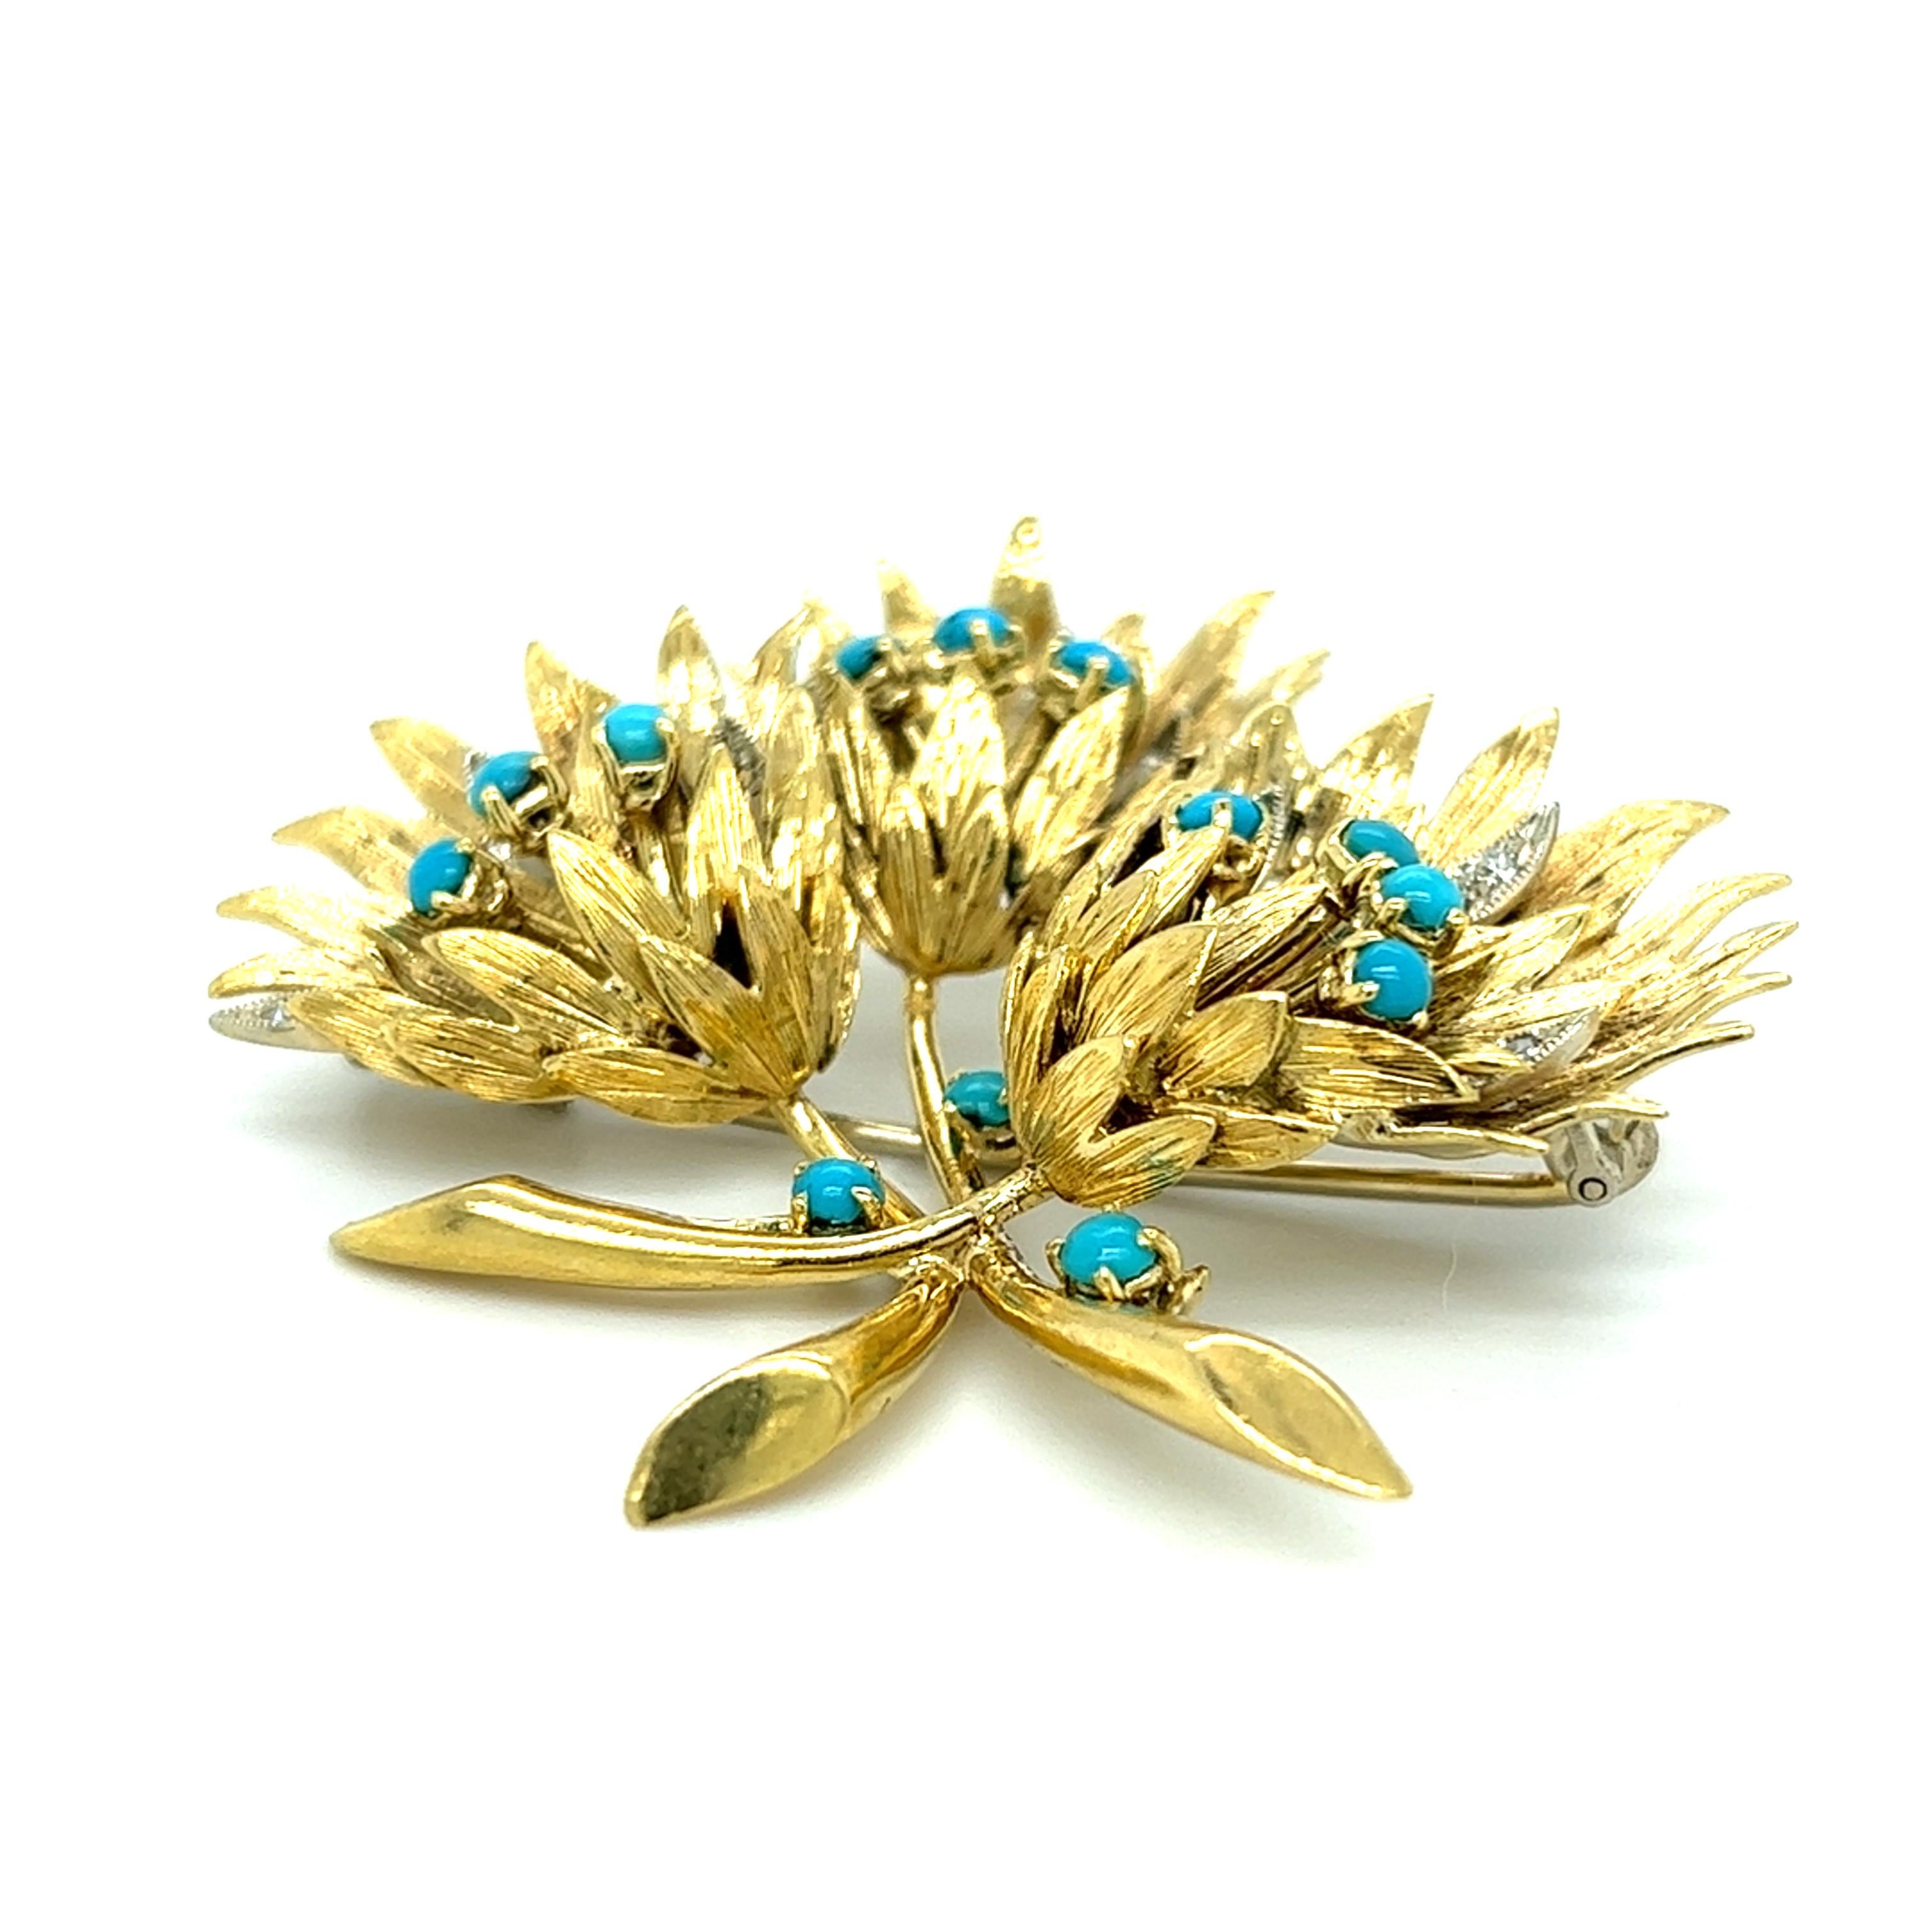 One mid-century 18 karat yellow gold flower design brooch by Cartier set with thirteen (13)  2.5mm round turquoise stones and five (5) single cut diamonds, approximately 0.10 carat total weight with matching I/J color and SI1 clarity.  The pin